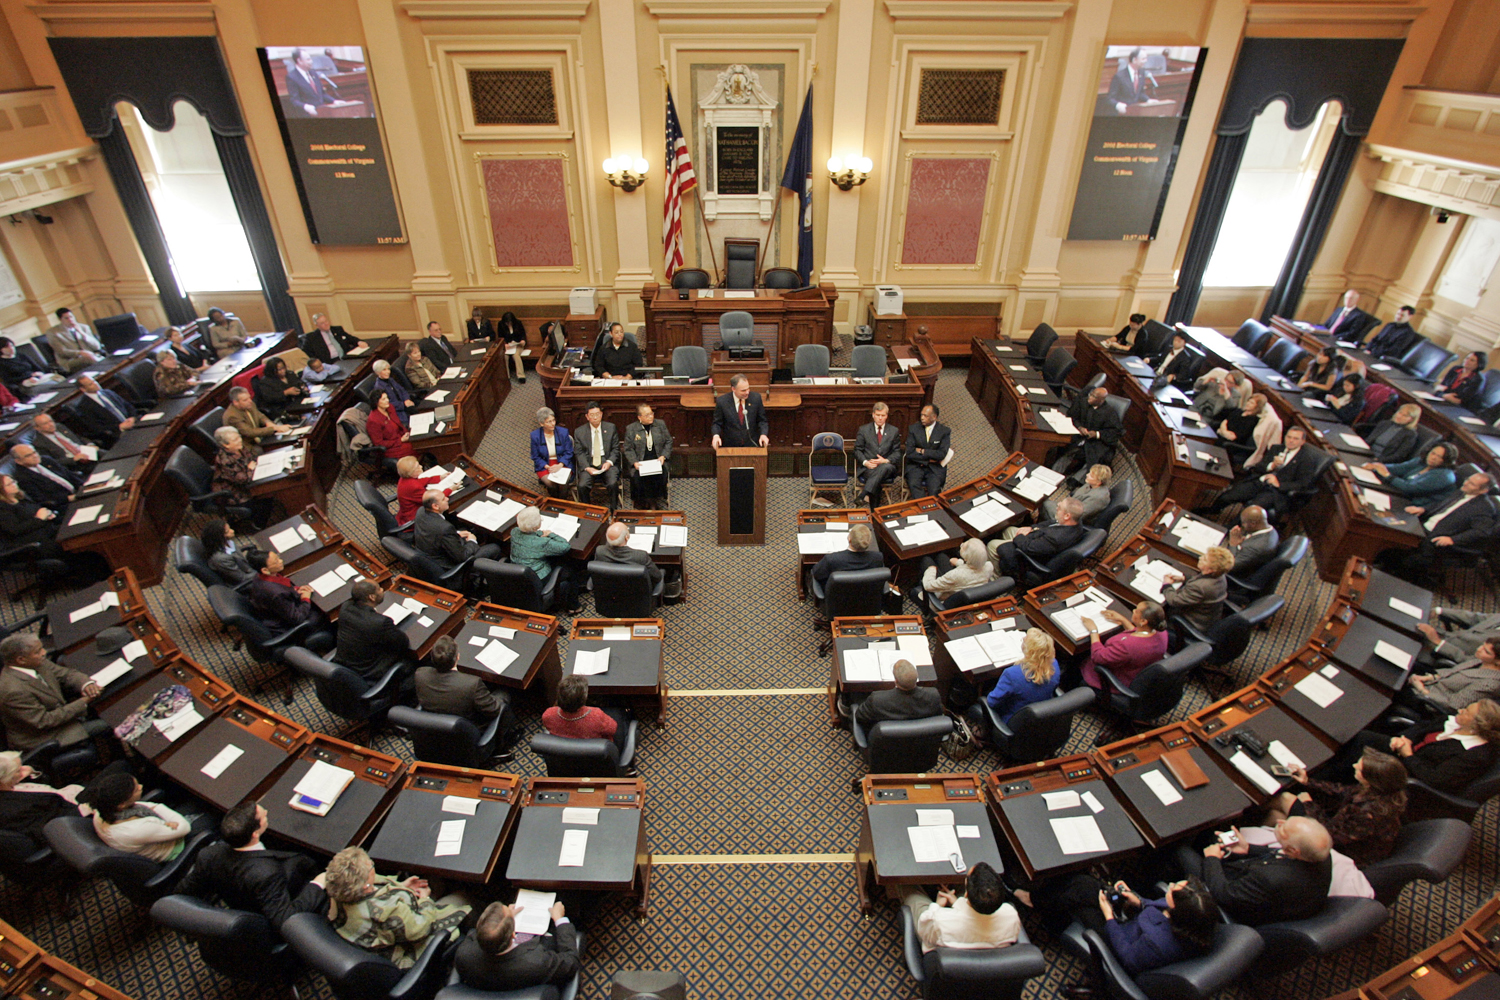 Virginia Gov. Timothy M. Kaine, at podium address the Virginia Electoral College in the House of Delegates chambers at the Capitol in Richmond, Va., Monday, Dec. 15, 2008. (AP Photo)